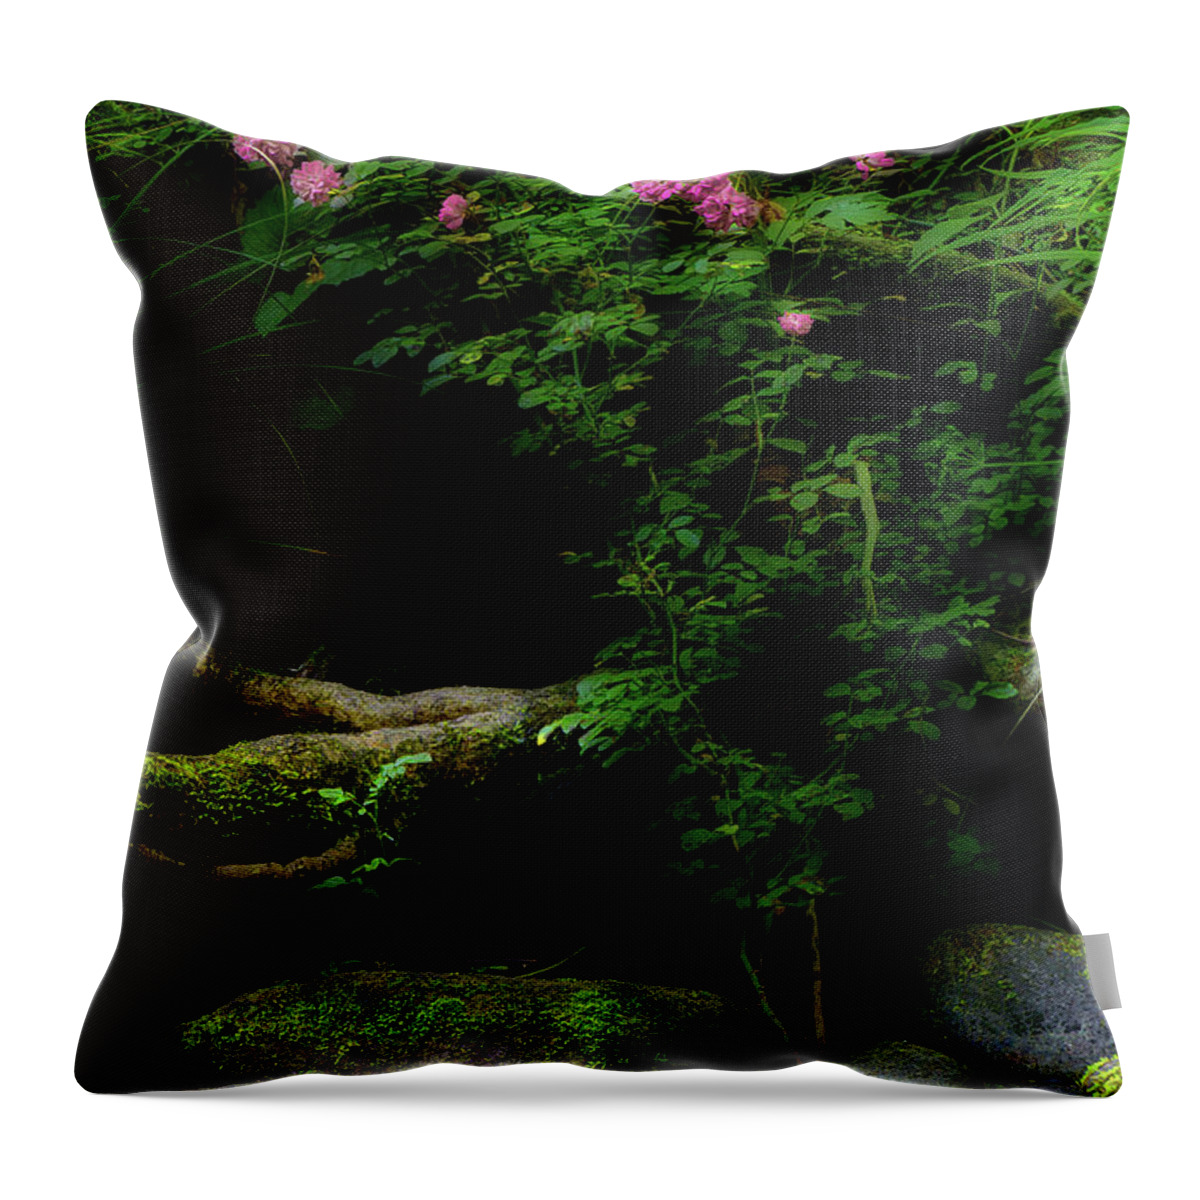 Roses Throw Pillow featuring the photograph Summer Rose Along The River by Michael Eingle